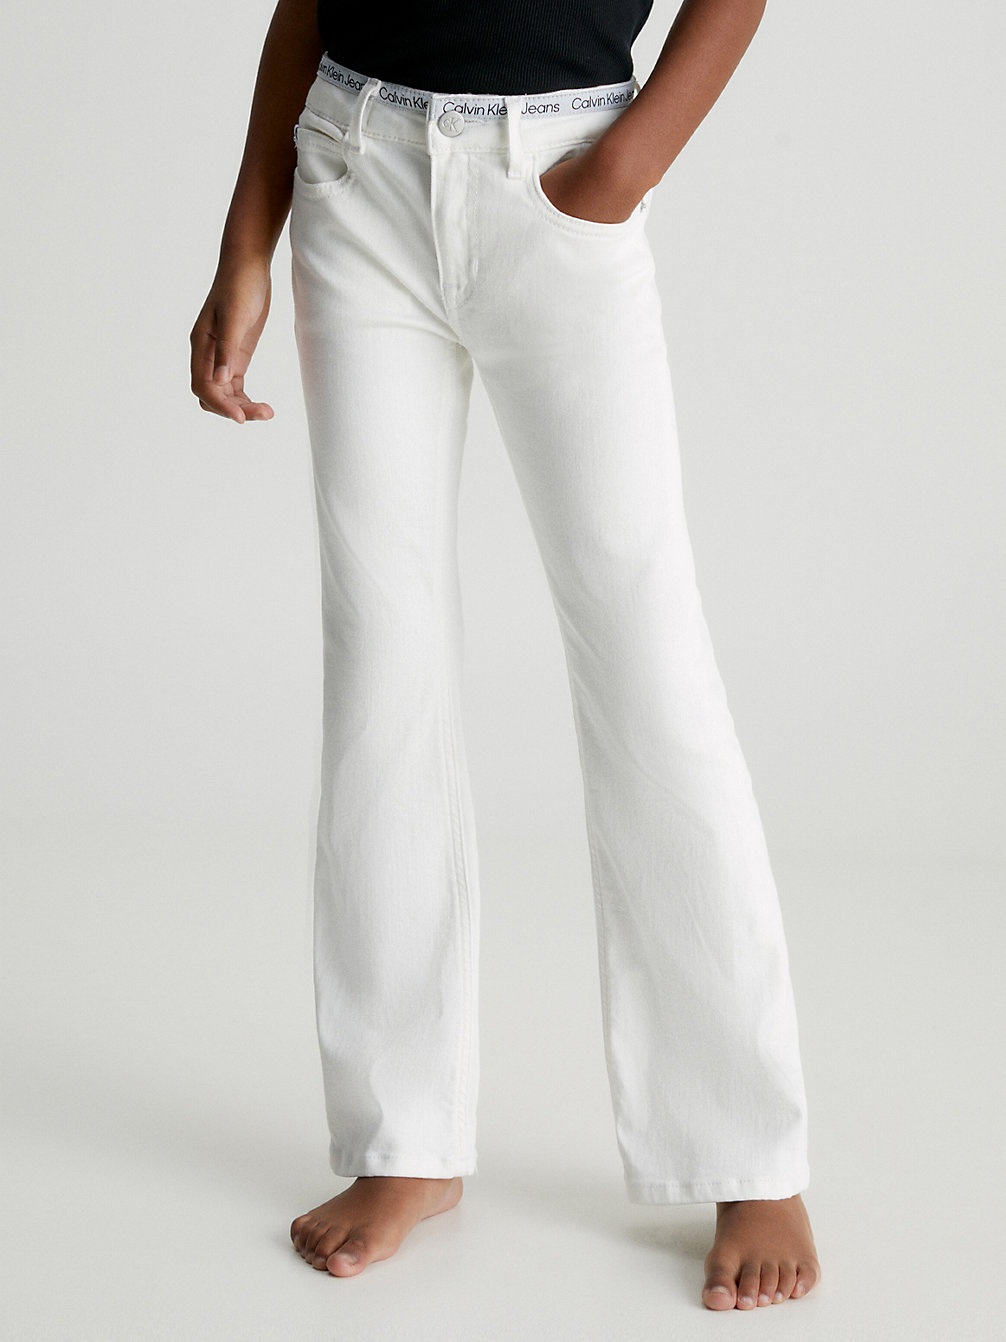 WHITE STRETCH TAPE > Mid Rise Flared Jeans > undefined meisjes - Calvin Klein